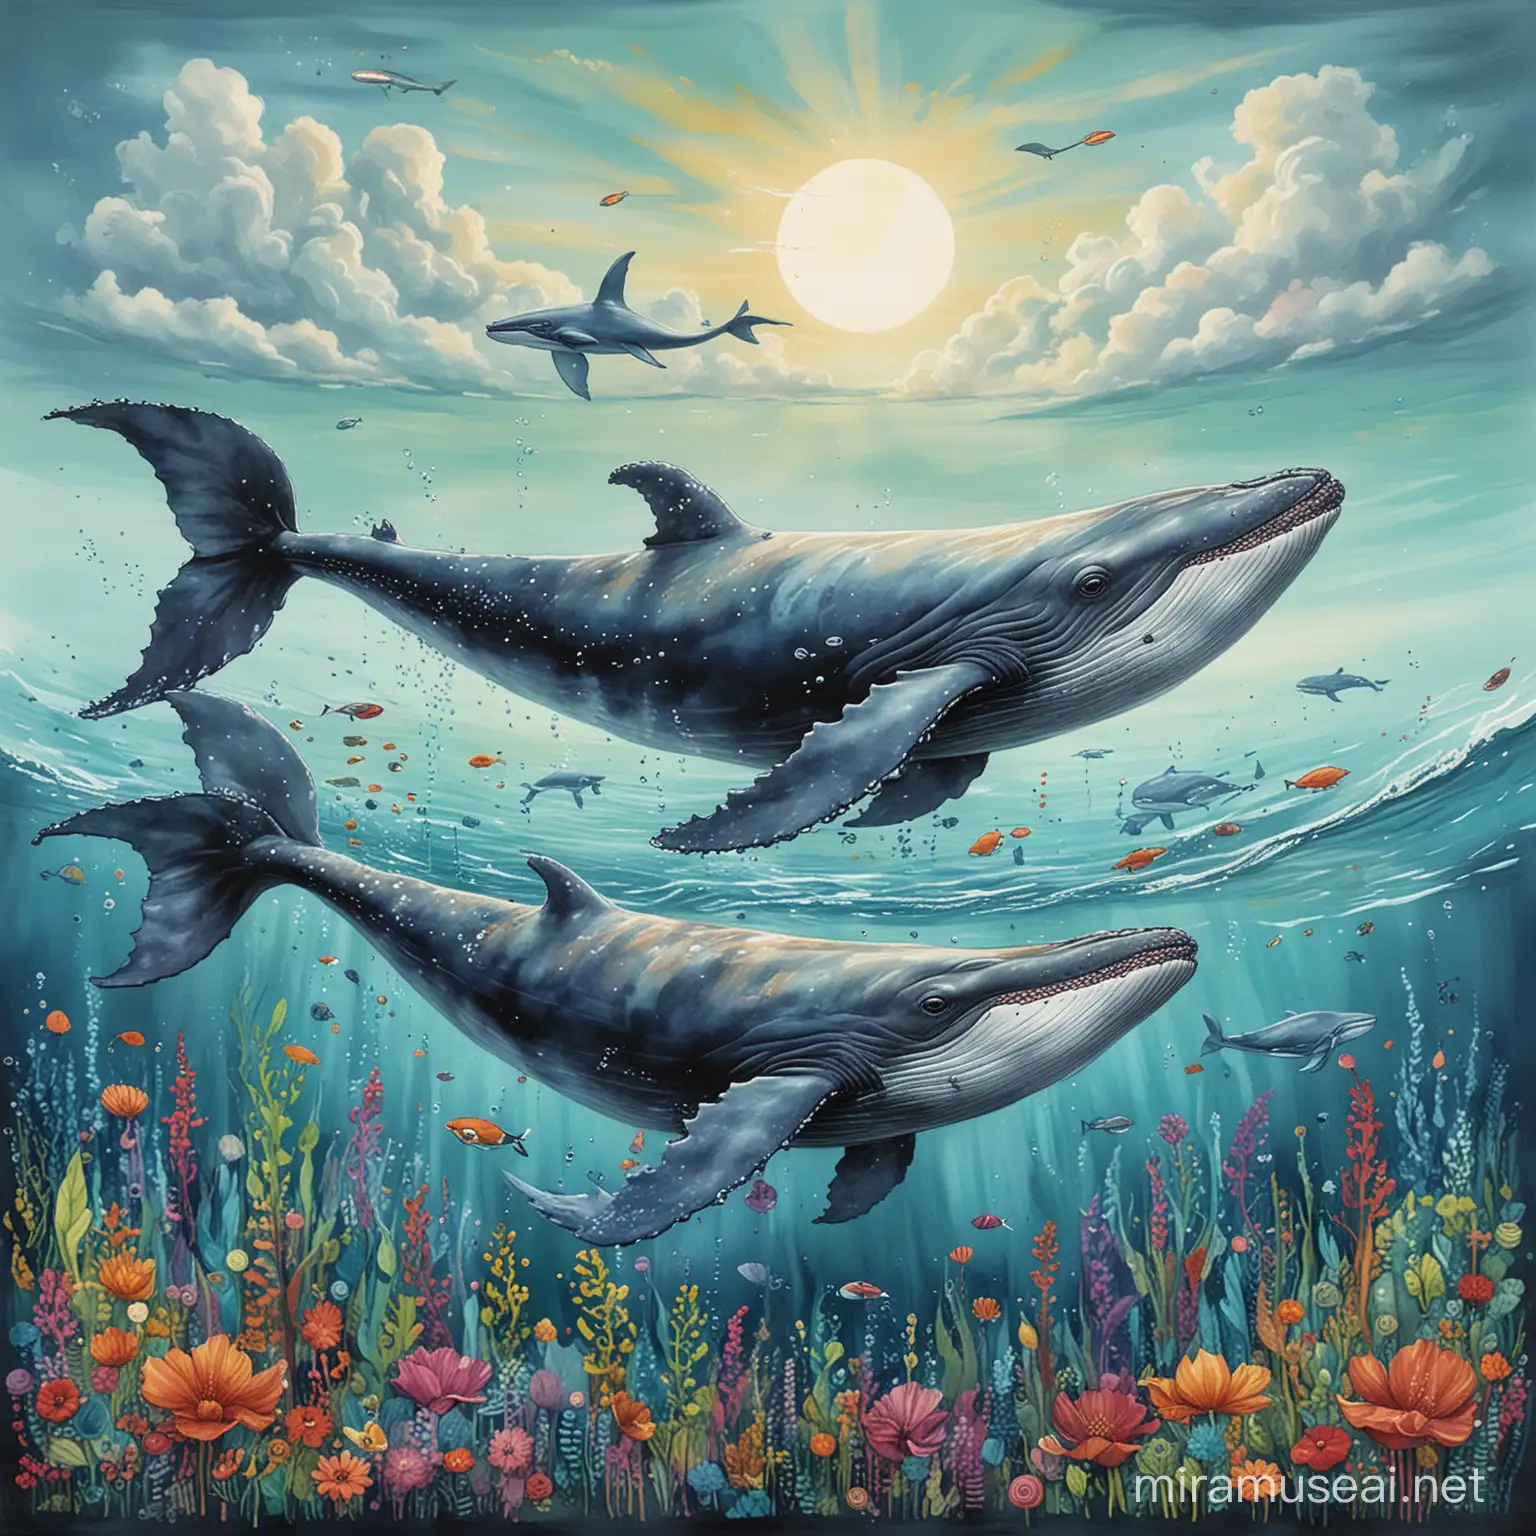 Playful Whimsical Art Depicting Graceful Whales Swimming Under the Moonlight